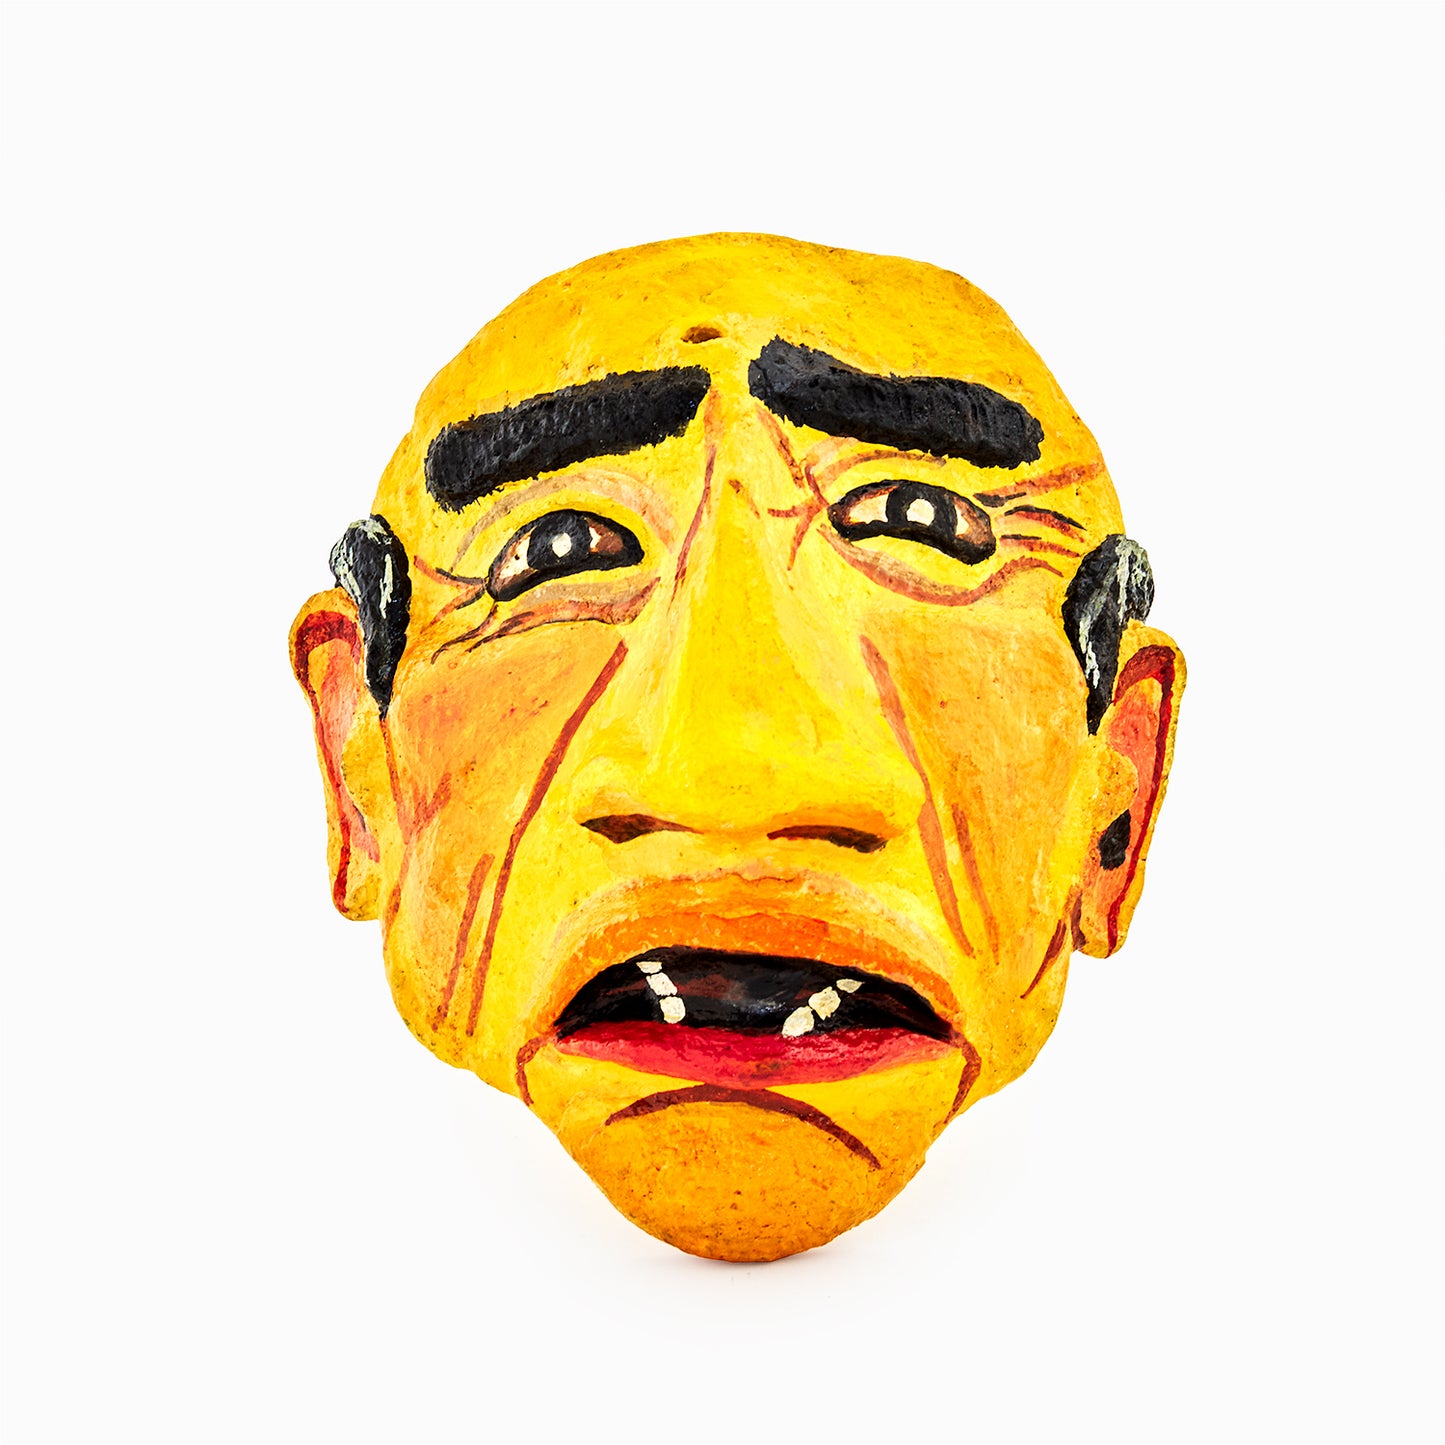 Old Man - Face Mask for Wall Hanging